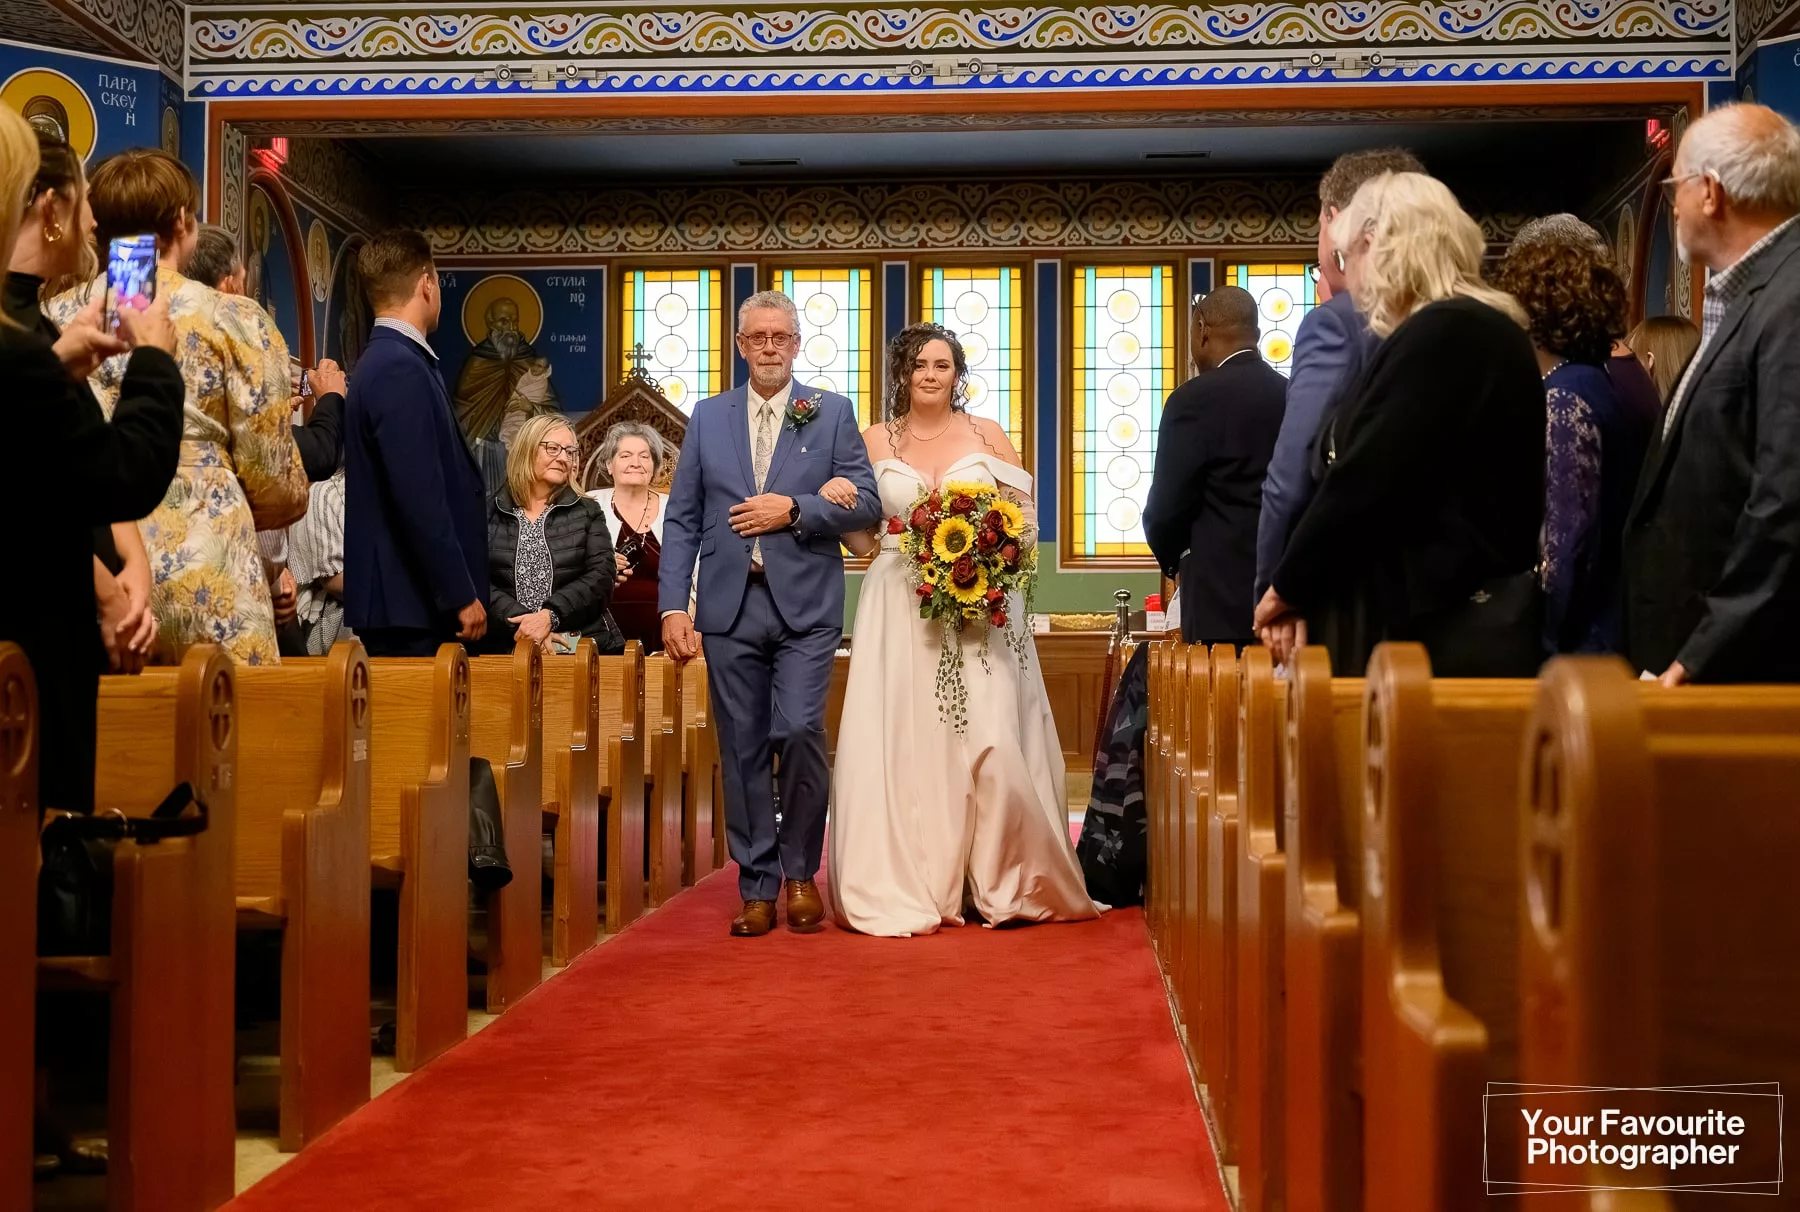 Bride and her father walk down the aisle at St. George's Greek Orthodox Church in downtown Toronto